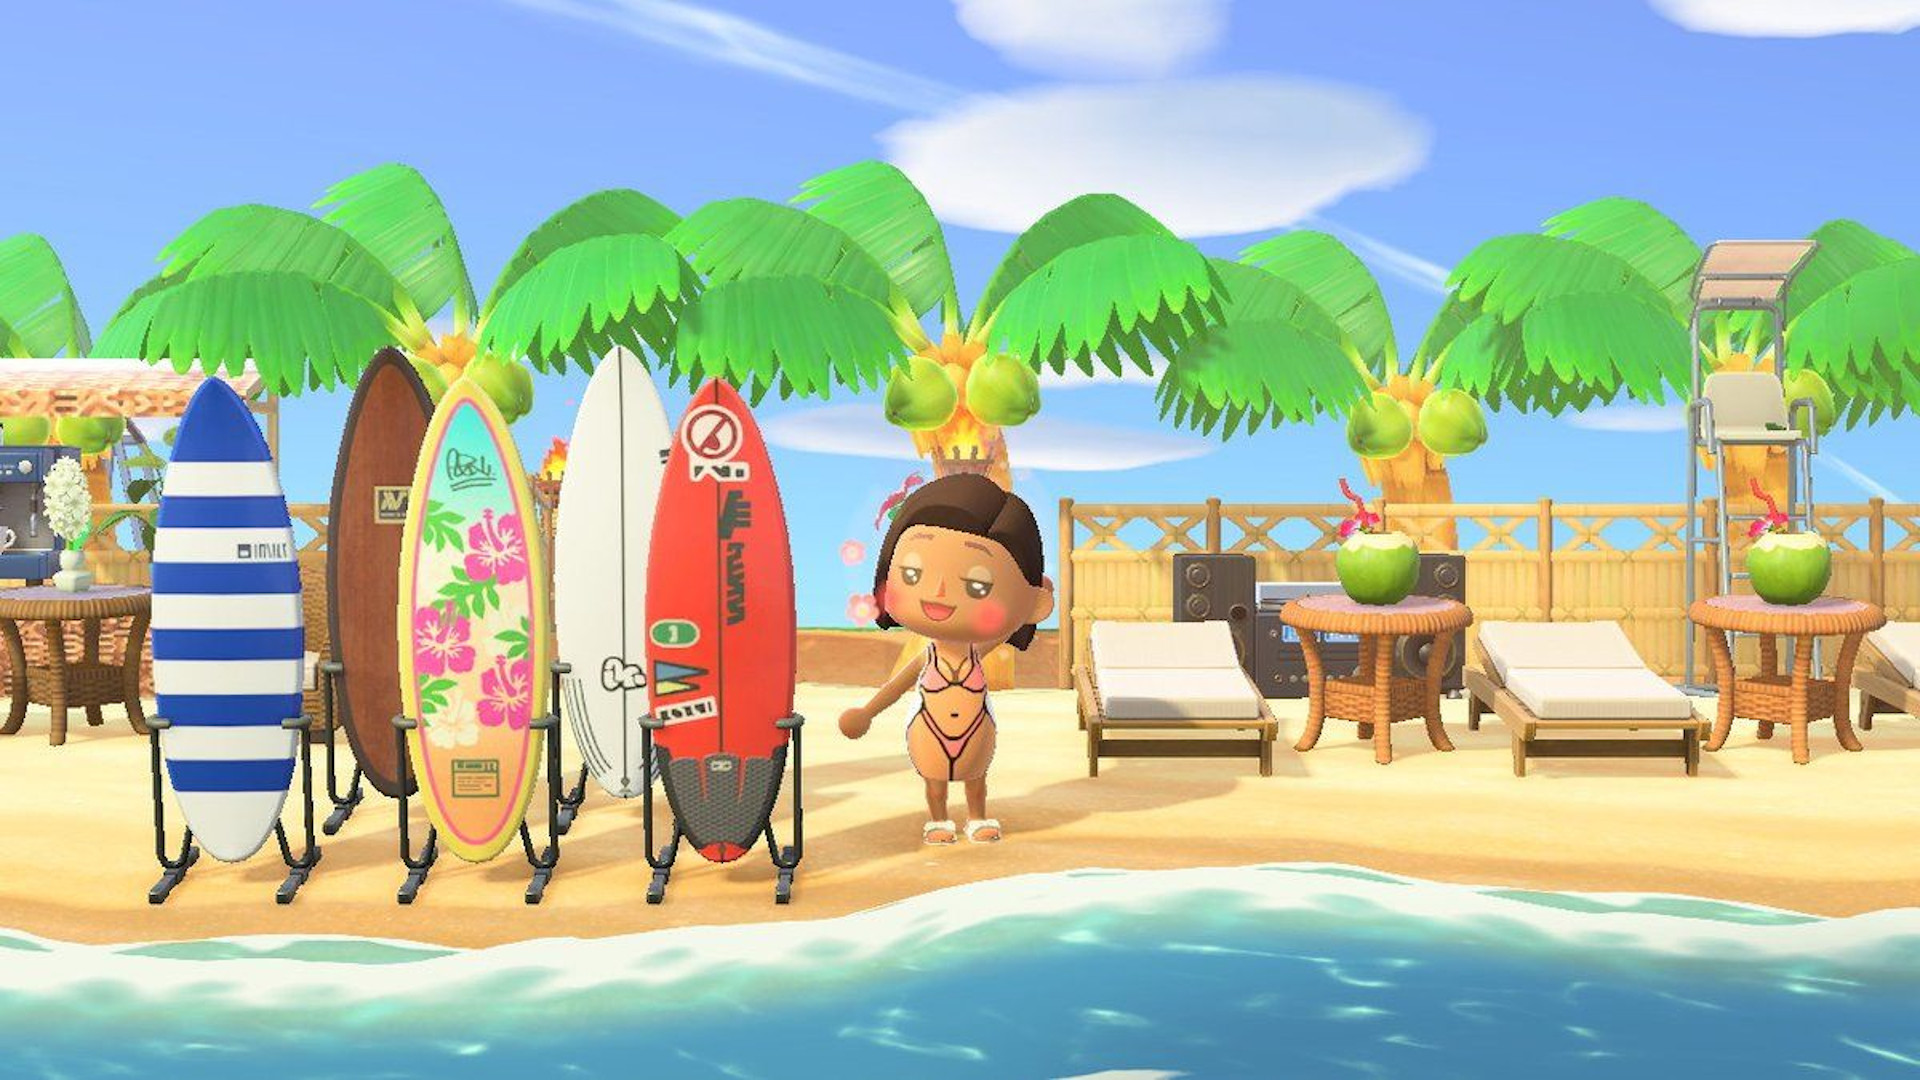 Animal Crossing New Horizons island ideas: An Animal Crossing character in a bikini poses with surfboards on the beach.